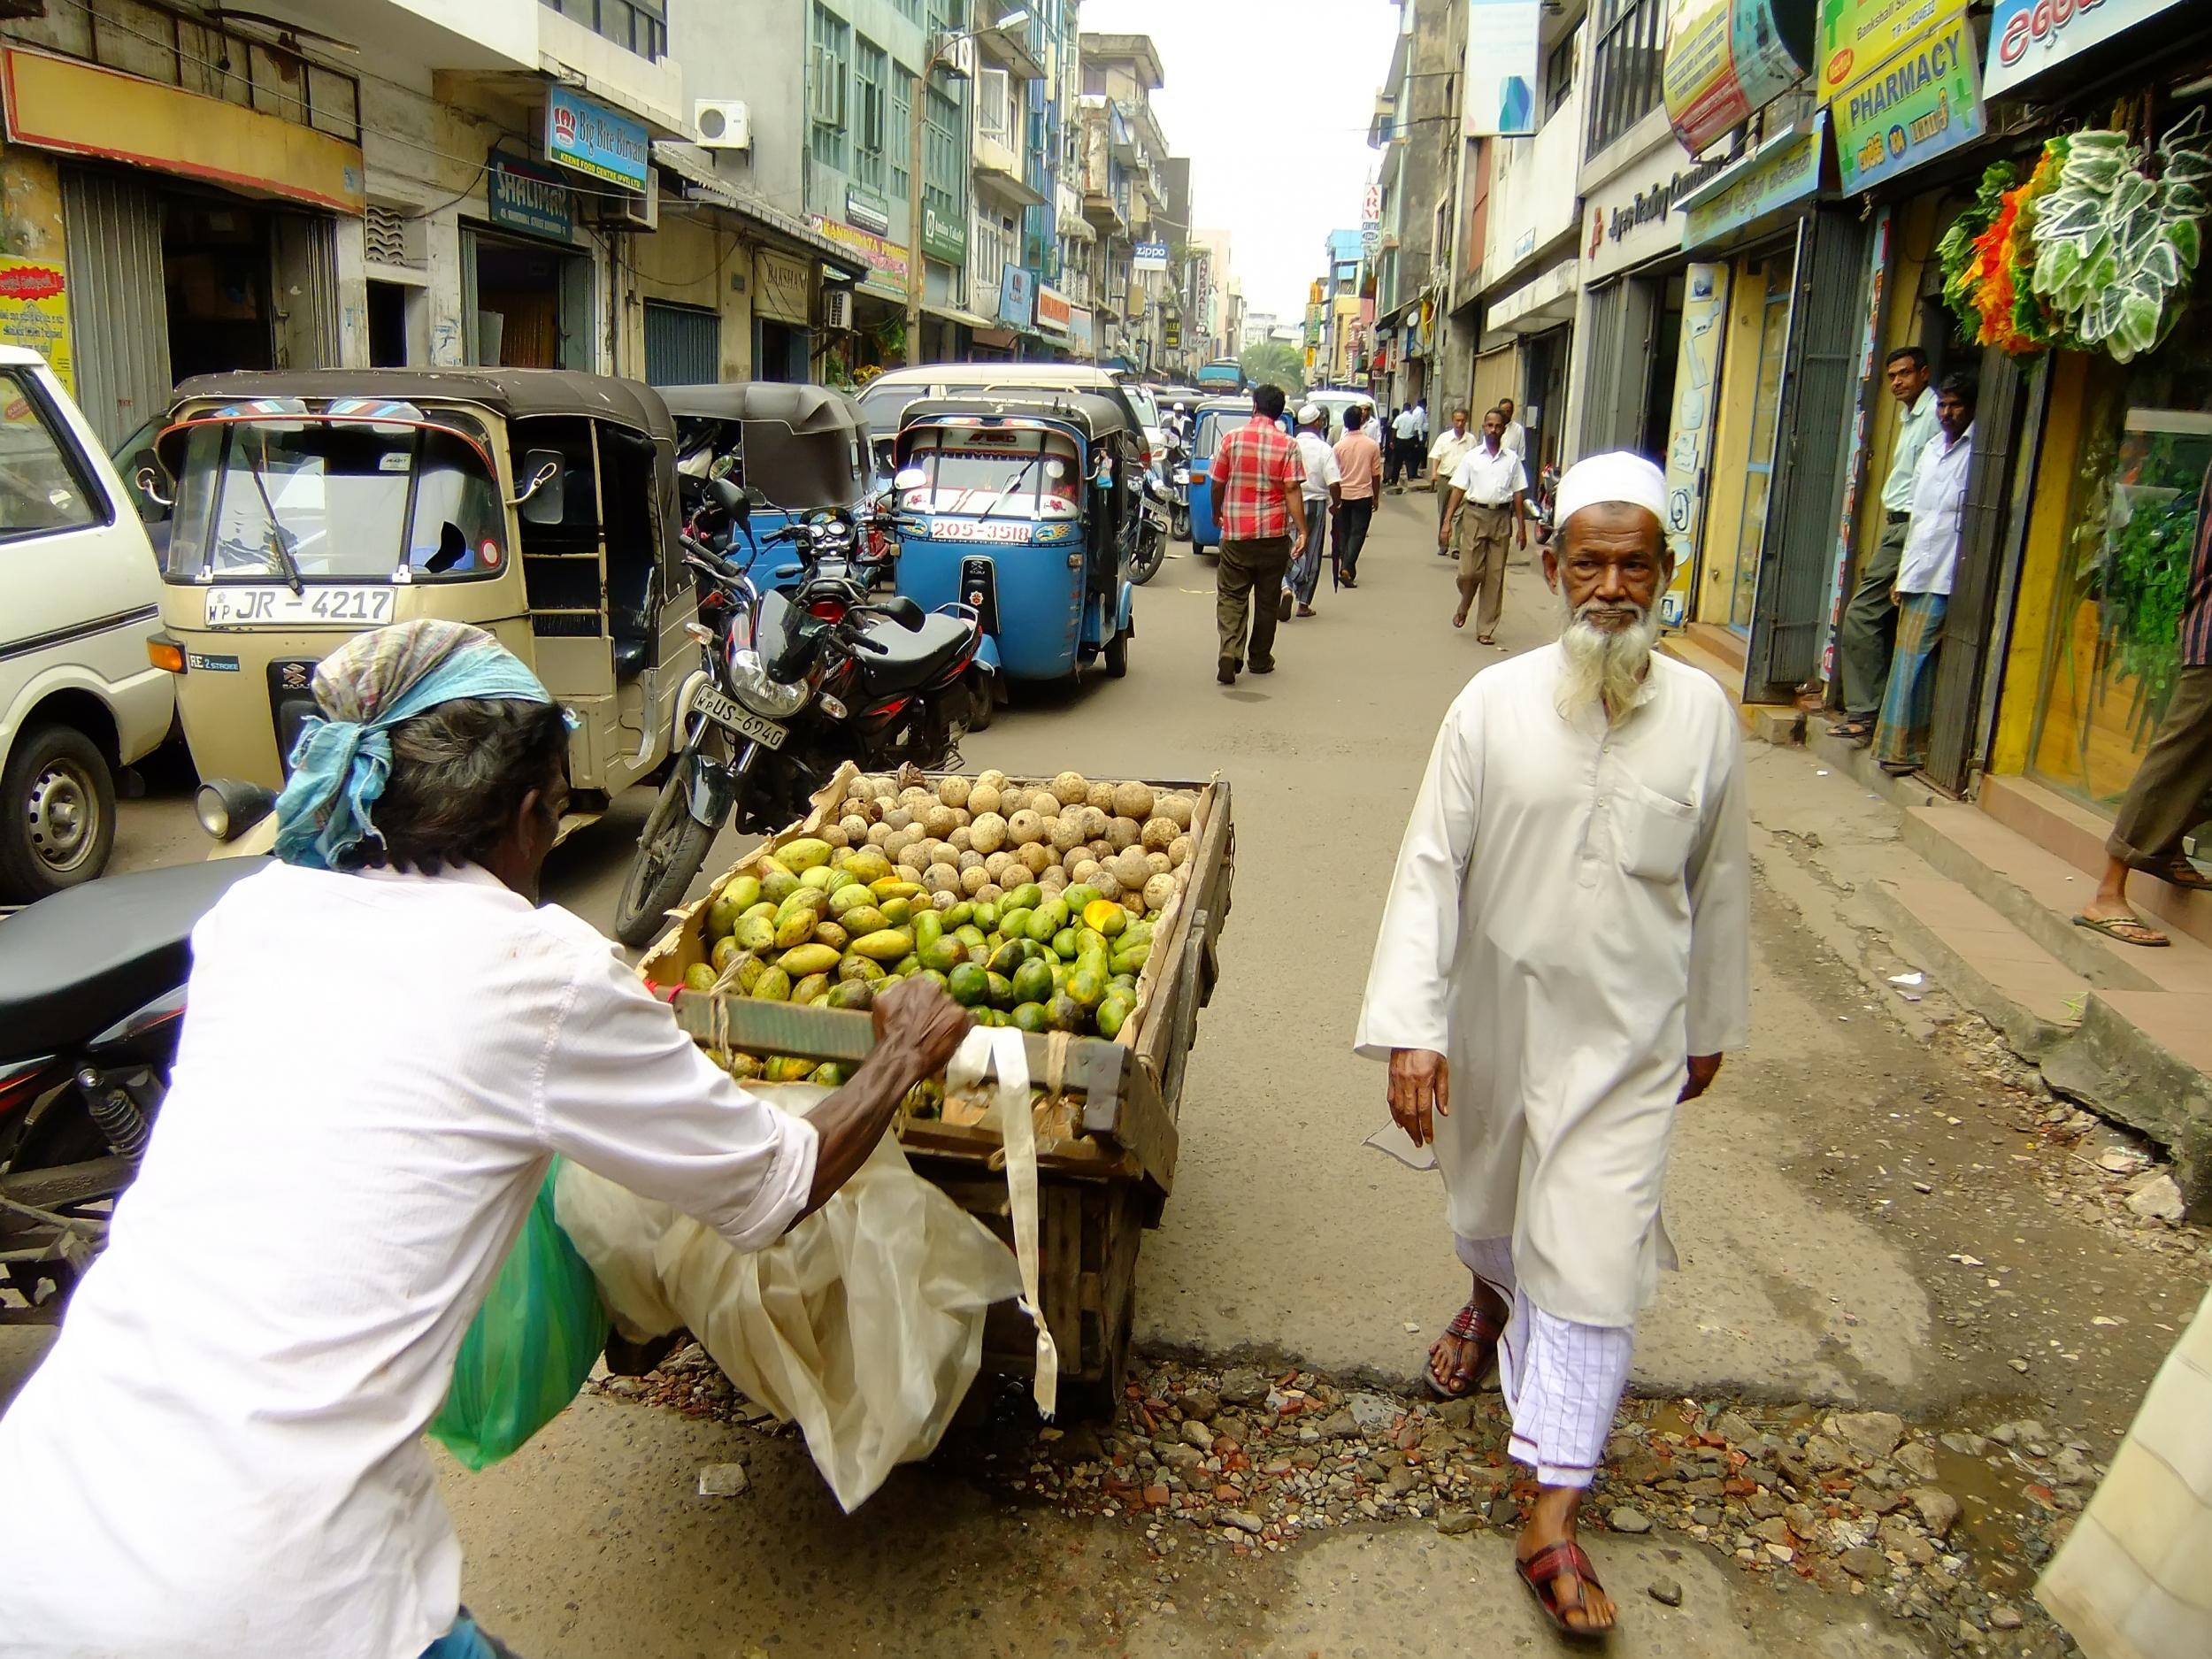 The busy Pettah neighbourhood, known for its markets